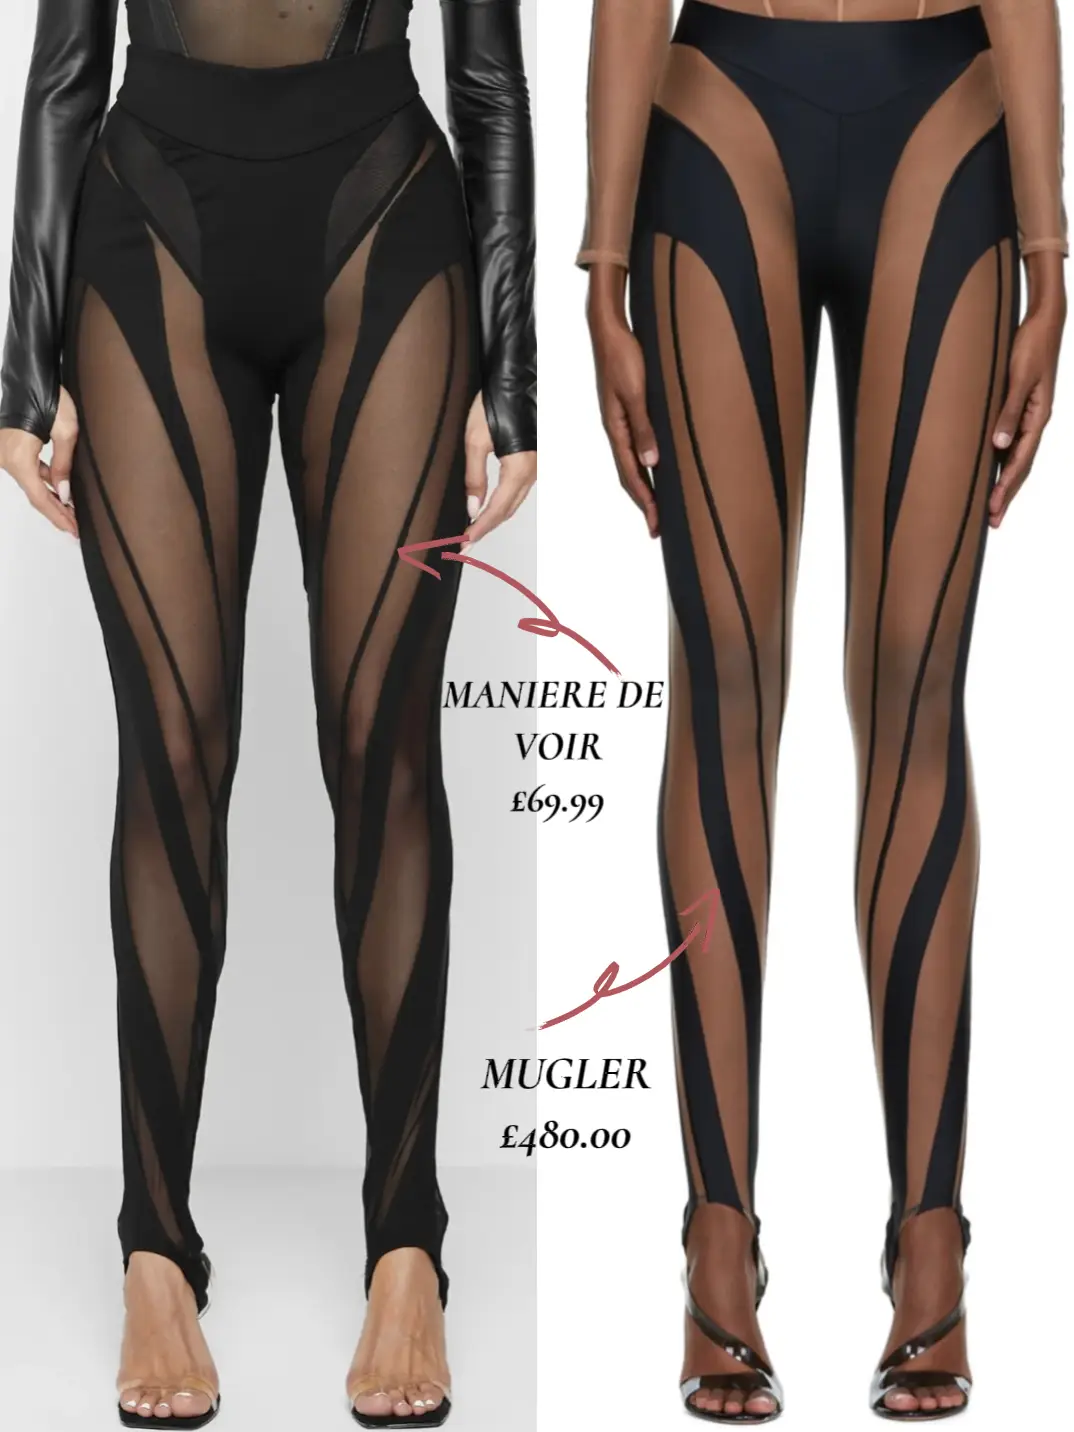 THE MUGLER DUPE YOU NEED, Gallery posted by Kyra Skinner